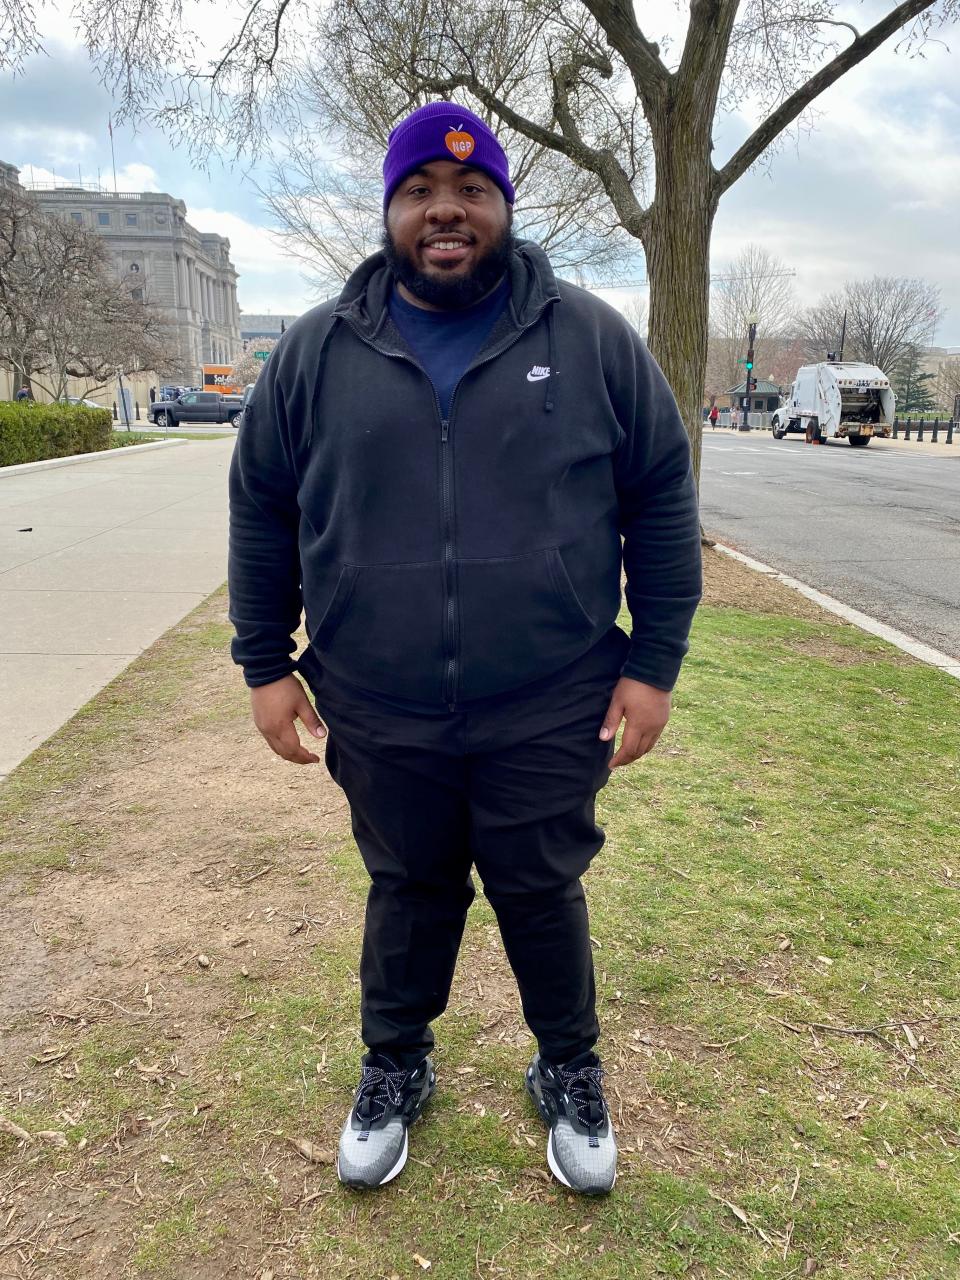 Jason Lowe, a senior at Albany State University in Georgia, traveled up to Washington, D.C., by bus with dozens of his peers to rally in favor of student loan cancellation. For Lowe and others, such forgiveness can serve as a form of reparations for Black and Brown borrowers.